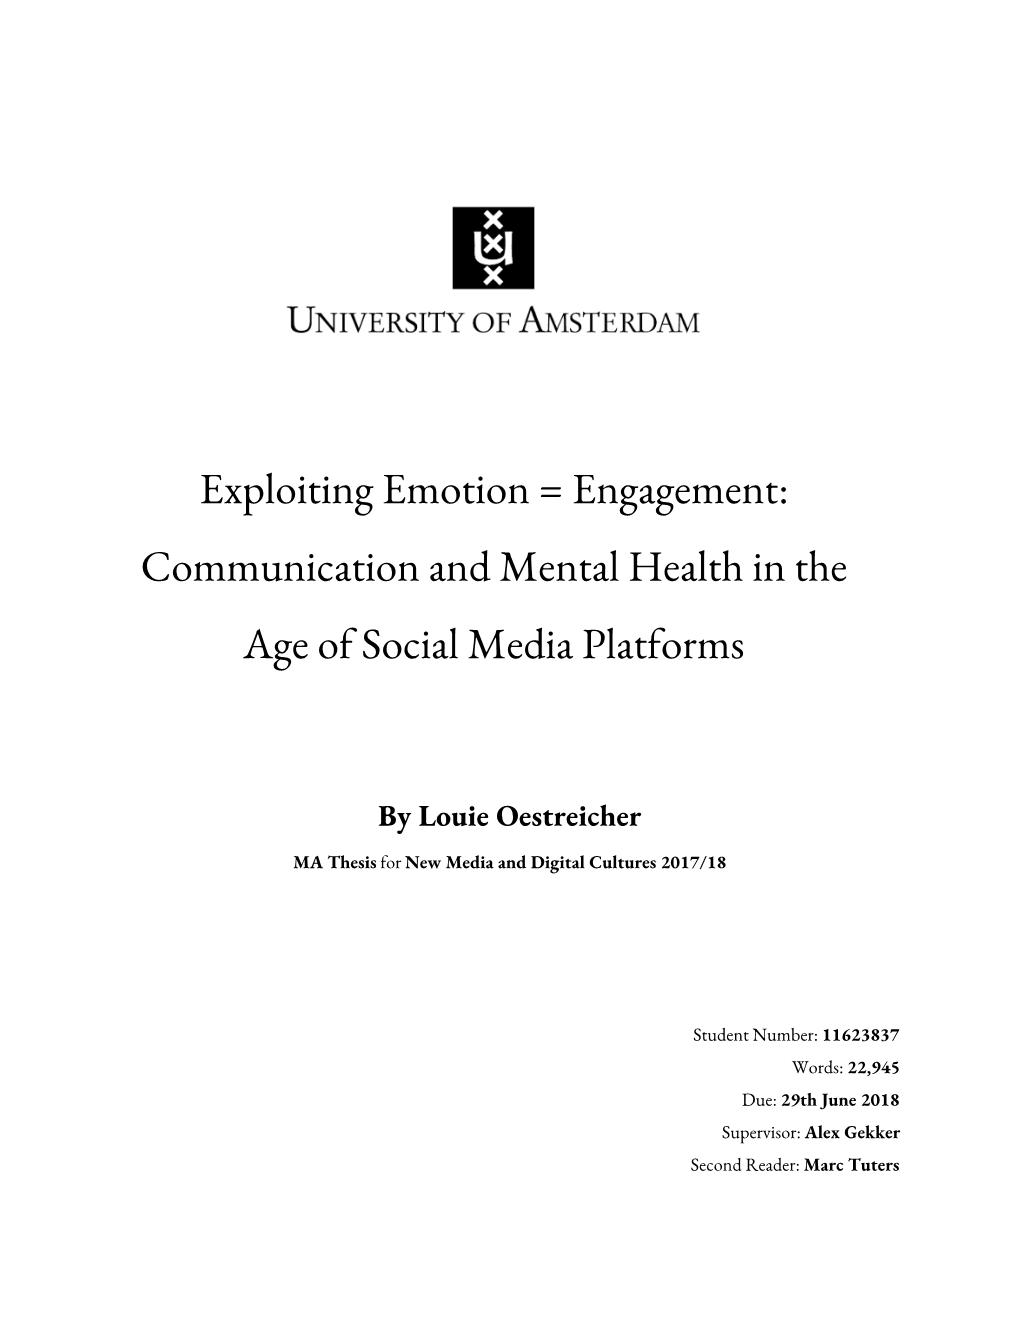 Exploiting Emotion = Engagement: Communication and Mental Health in the Age of Social Media Platforms